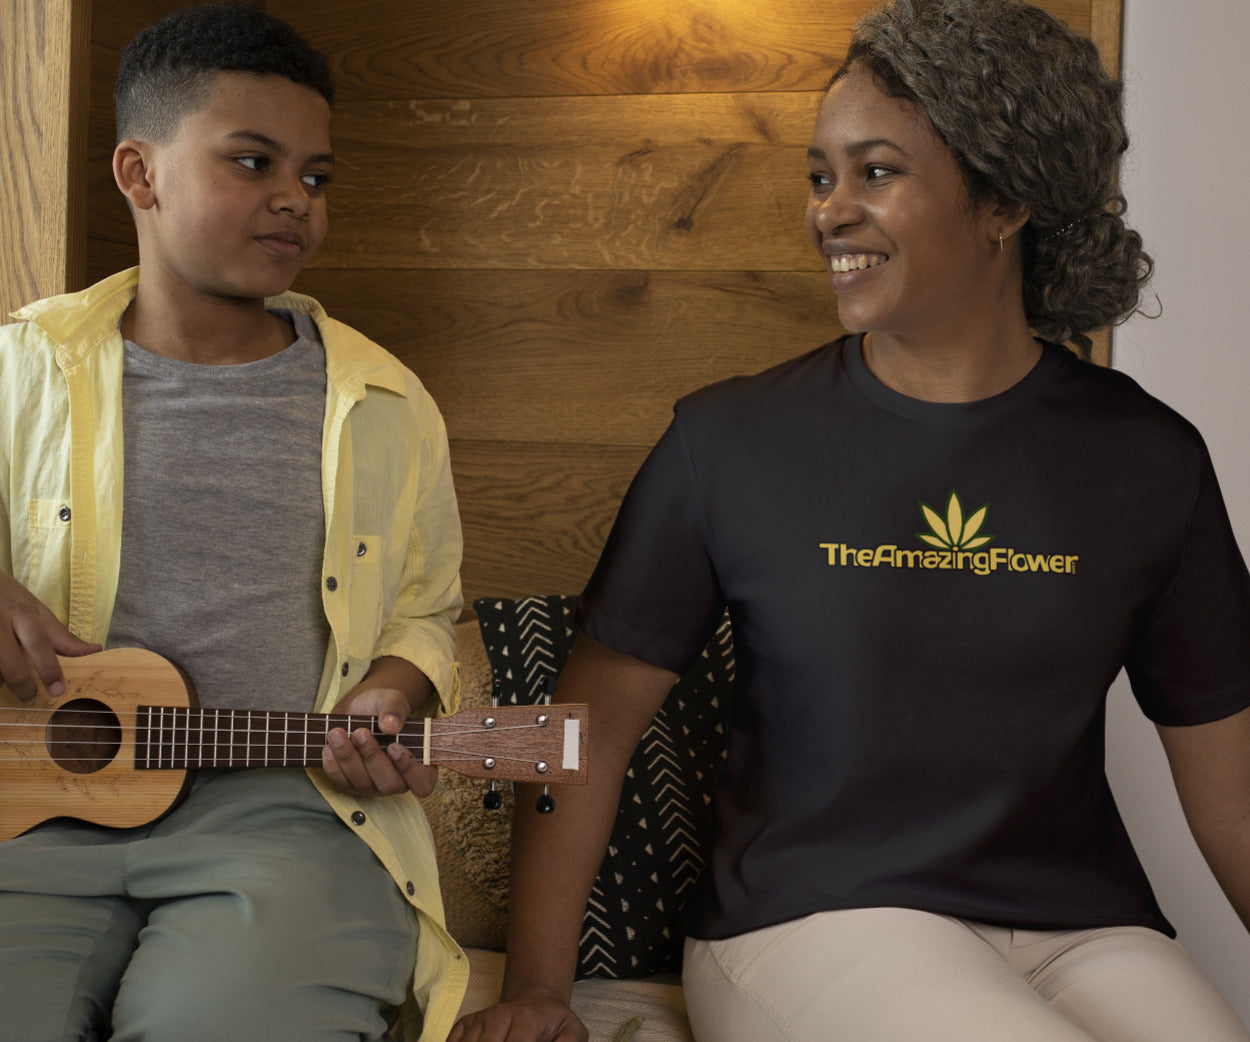 Old Gold Hemp Leaf Logo Women's T-Shirt in black worn by a woman looking at her son playing a ukulele